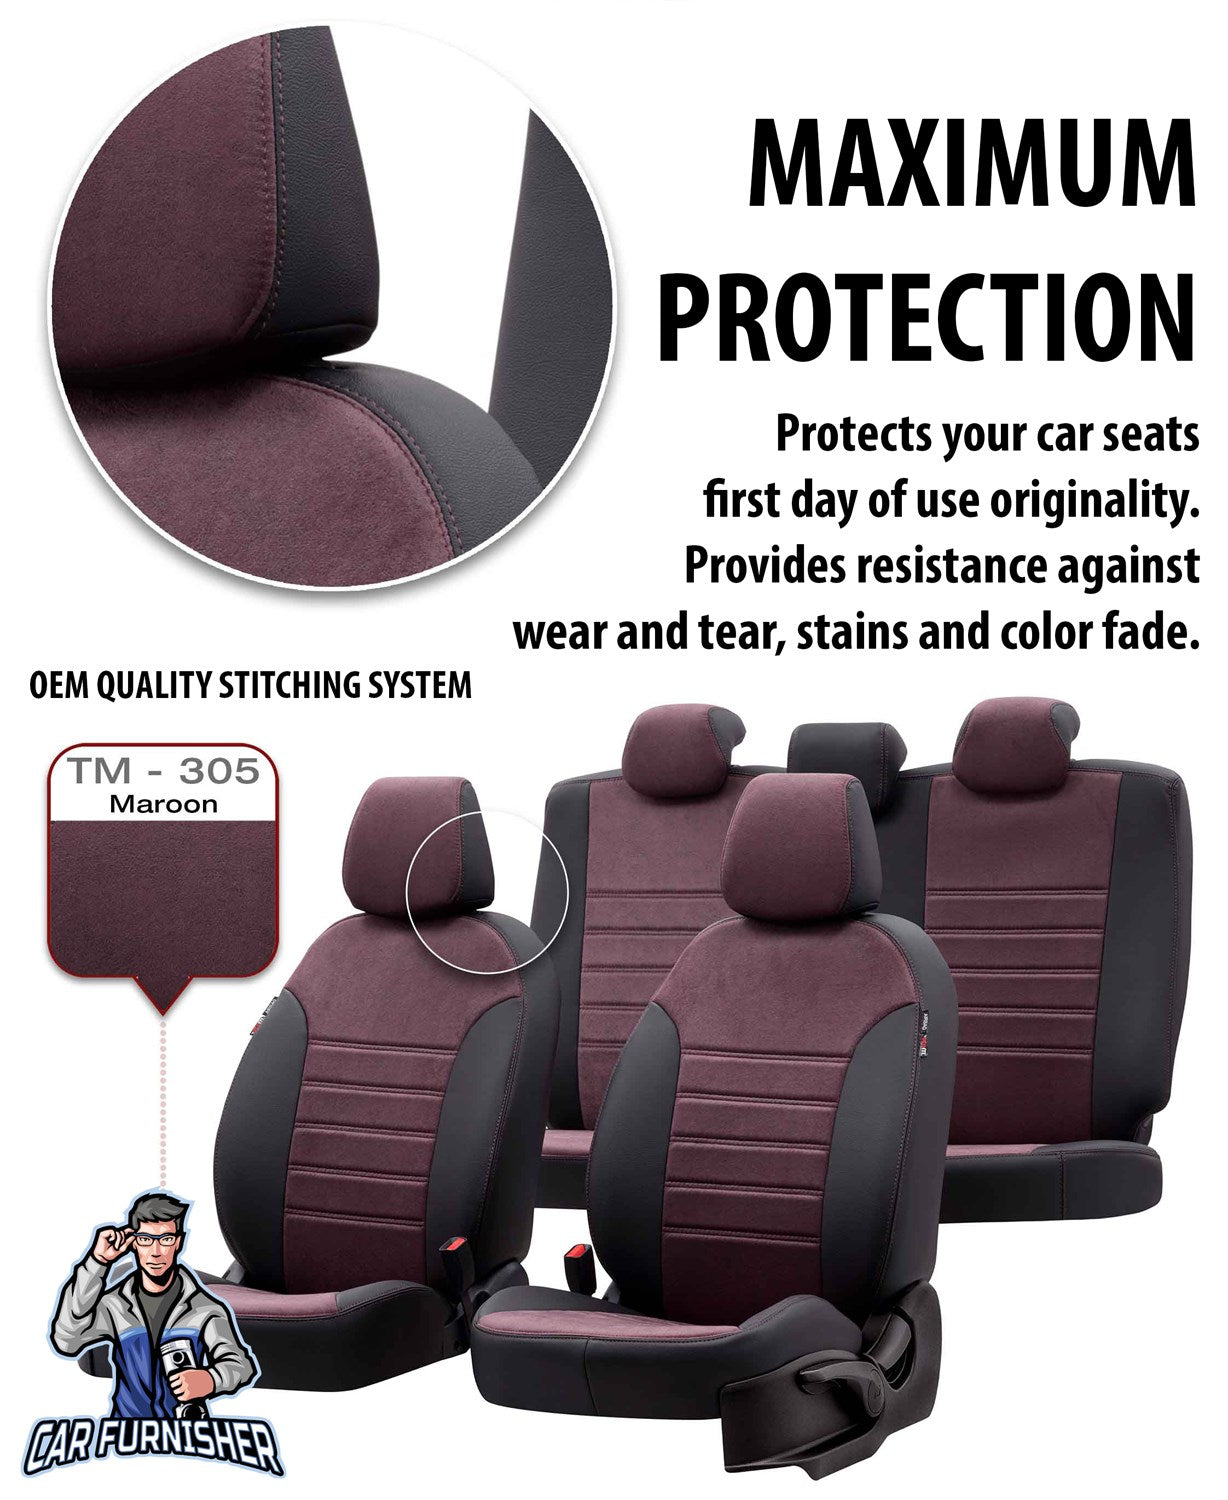 Chevrolet Rezzo Seat Covers Milano Suede Design Burgundy Leather & Suede Fabric